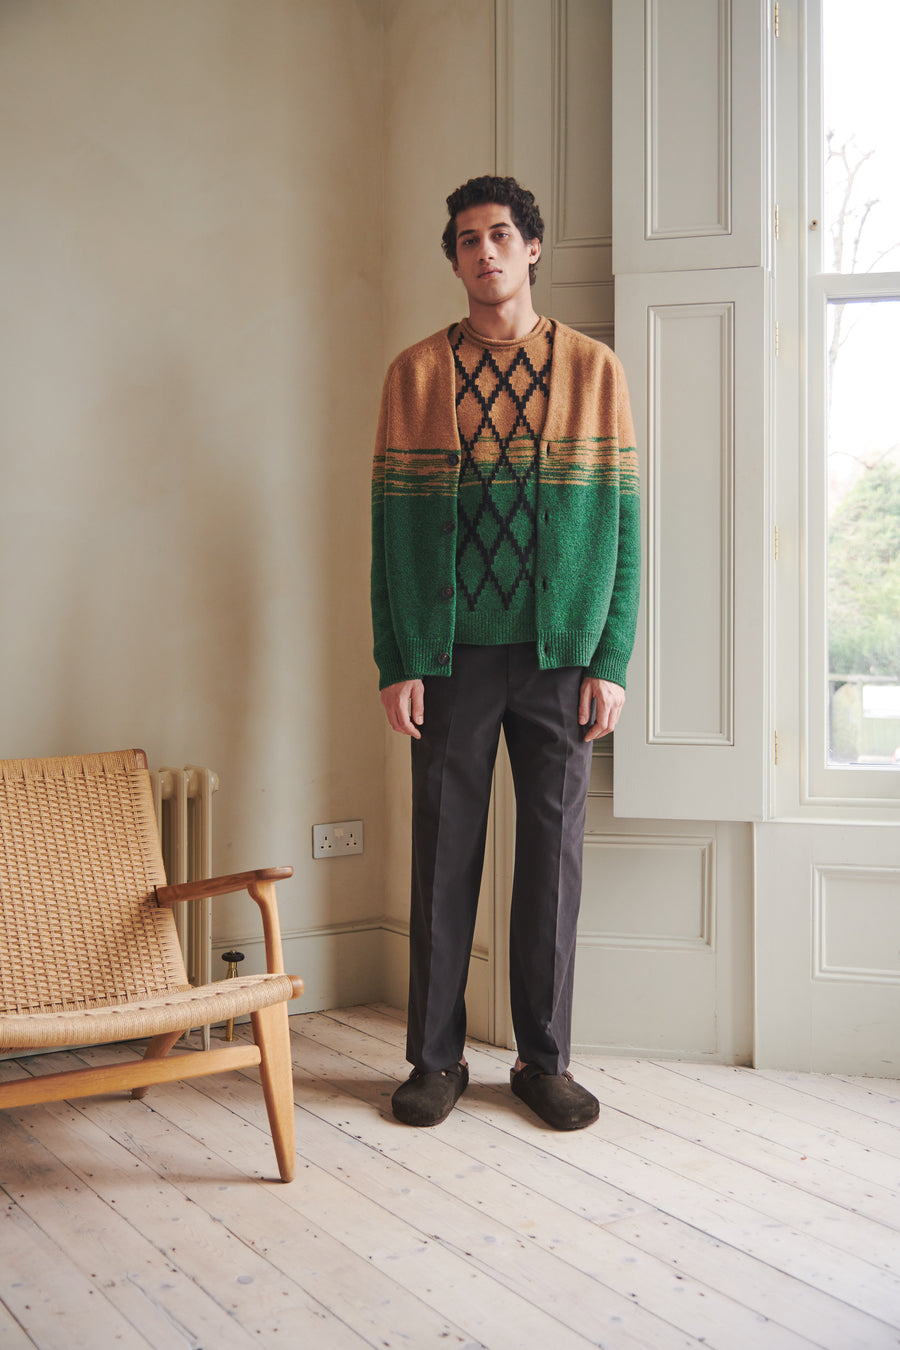 Lambswool Round Neck Jumper With Argyle Pattern And Degrade Effect In Vicuna And Evergreen